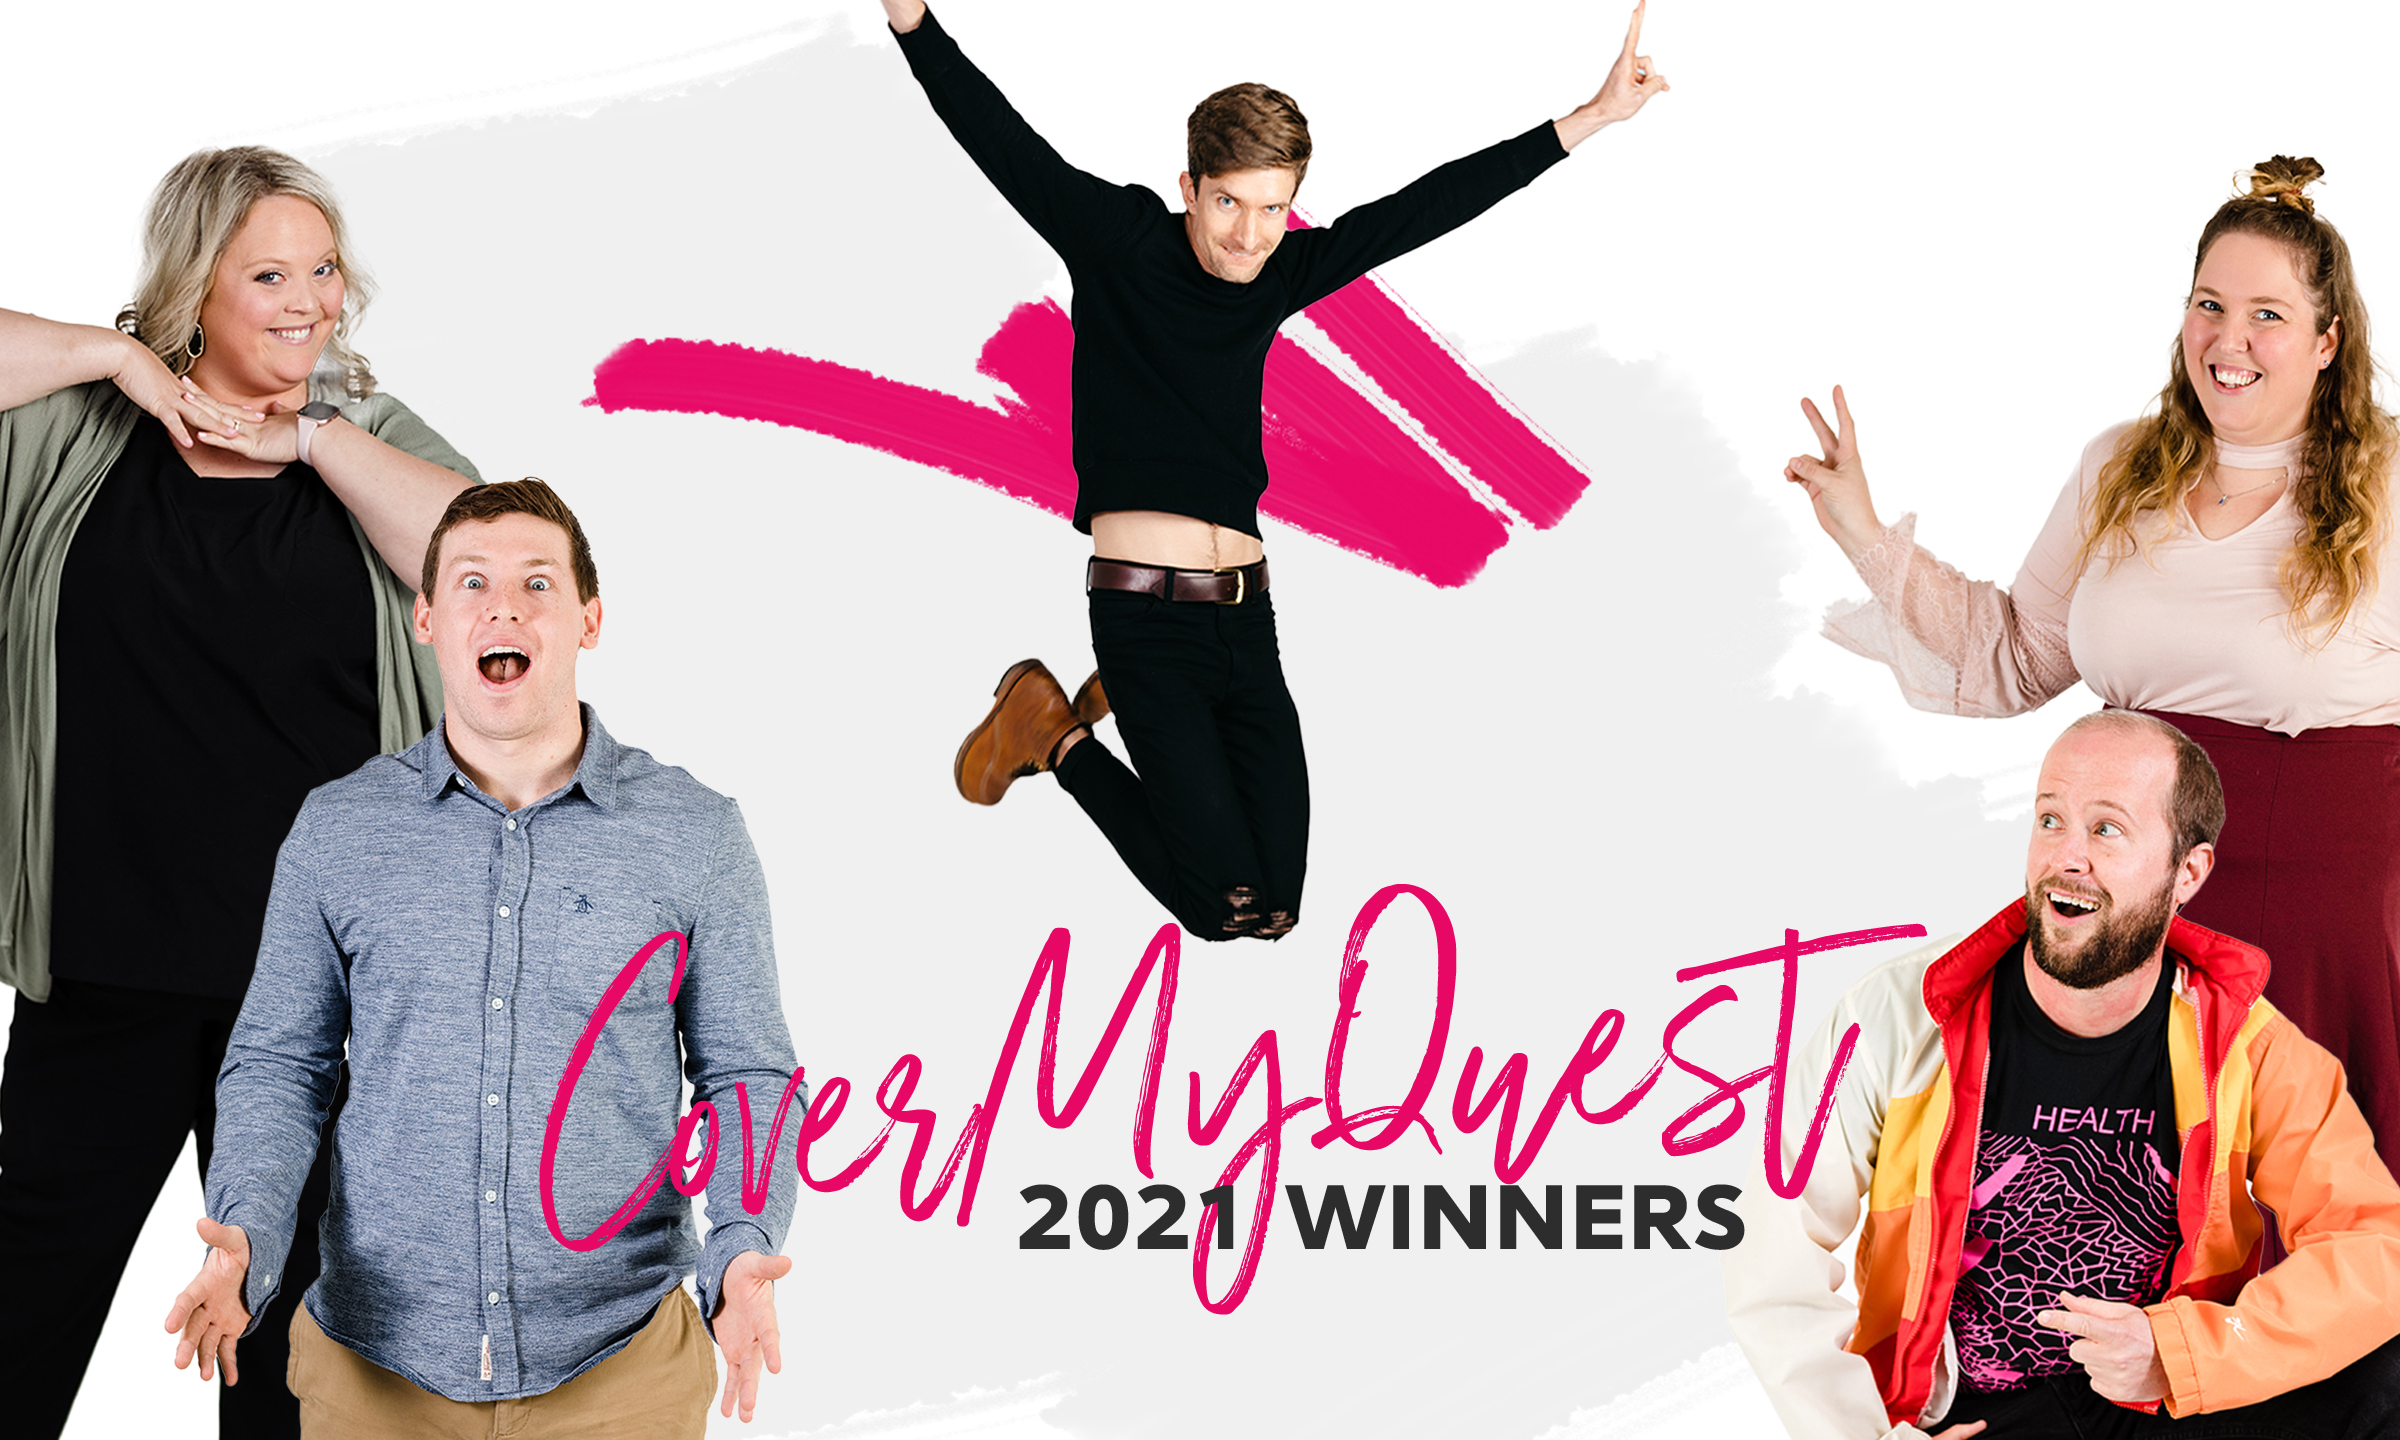 CoverMyQuest 2021 Feature Image